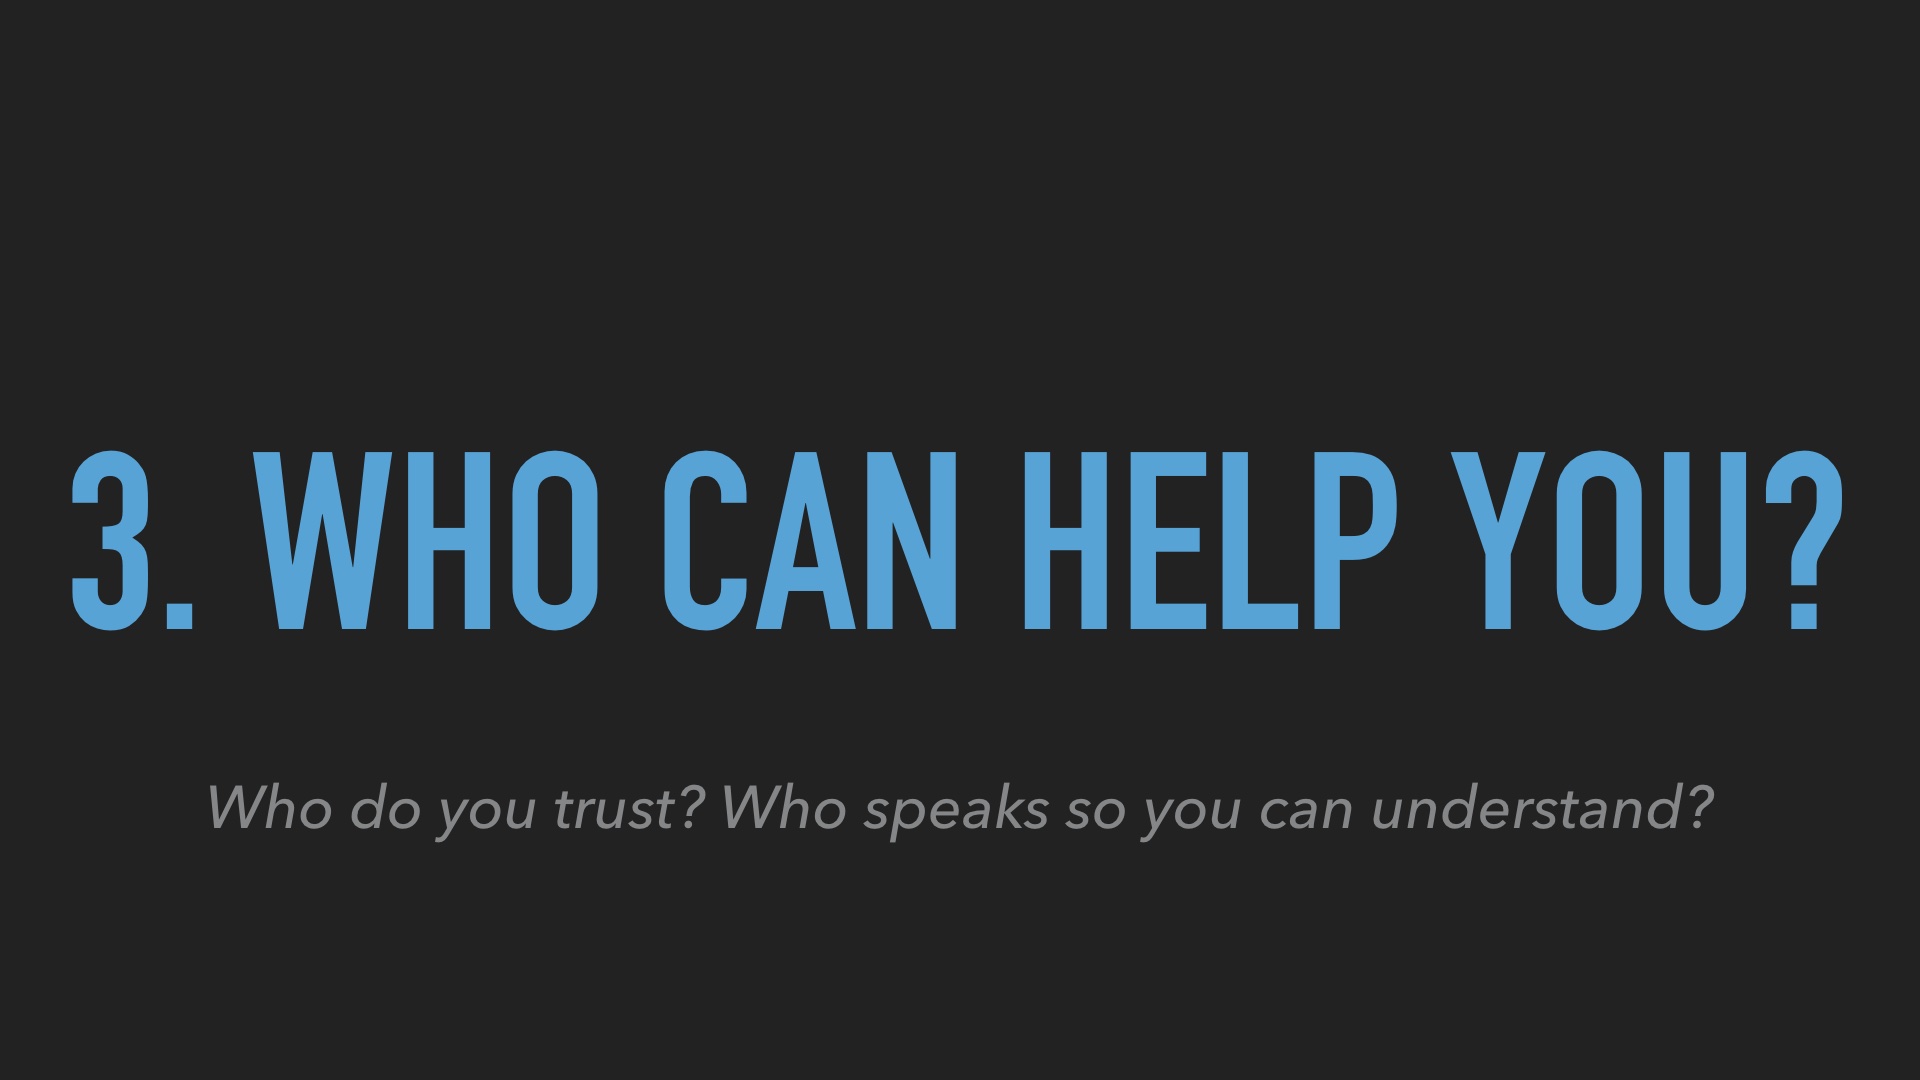 Title Slide #3 Who can help you? Subtitle 